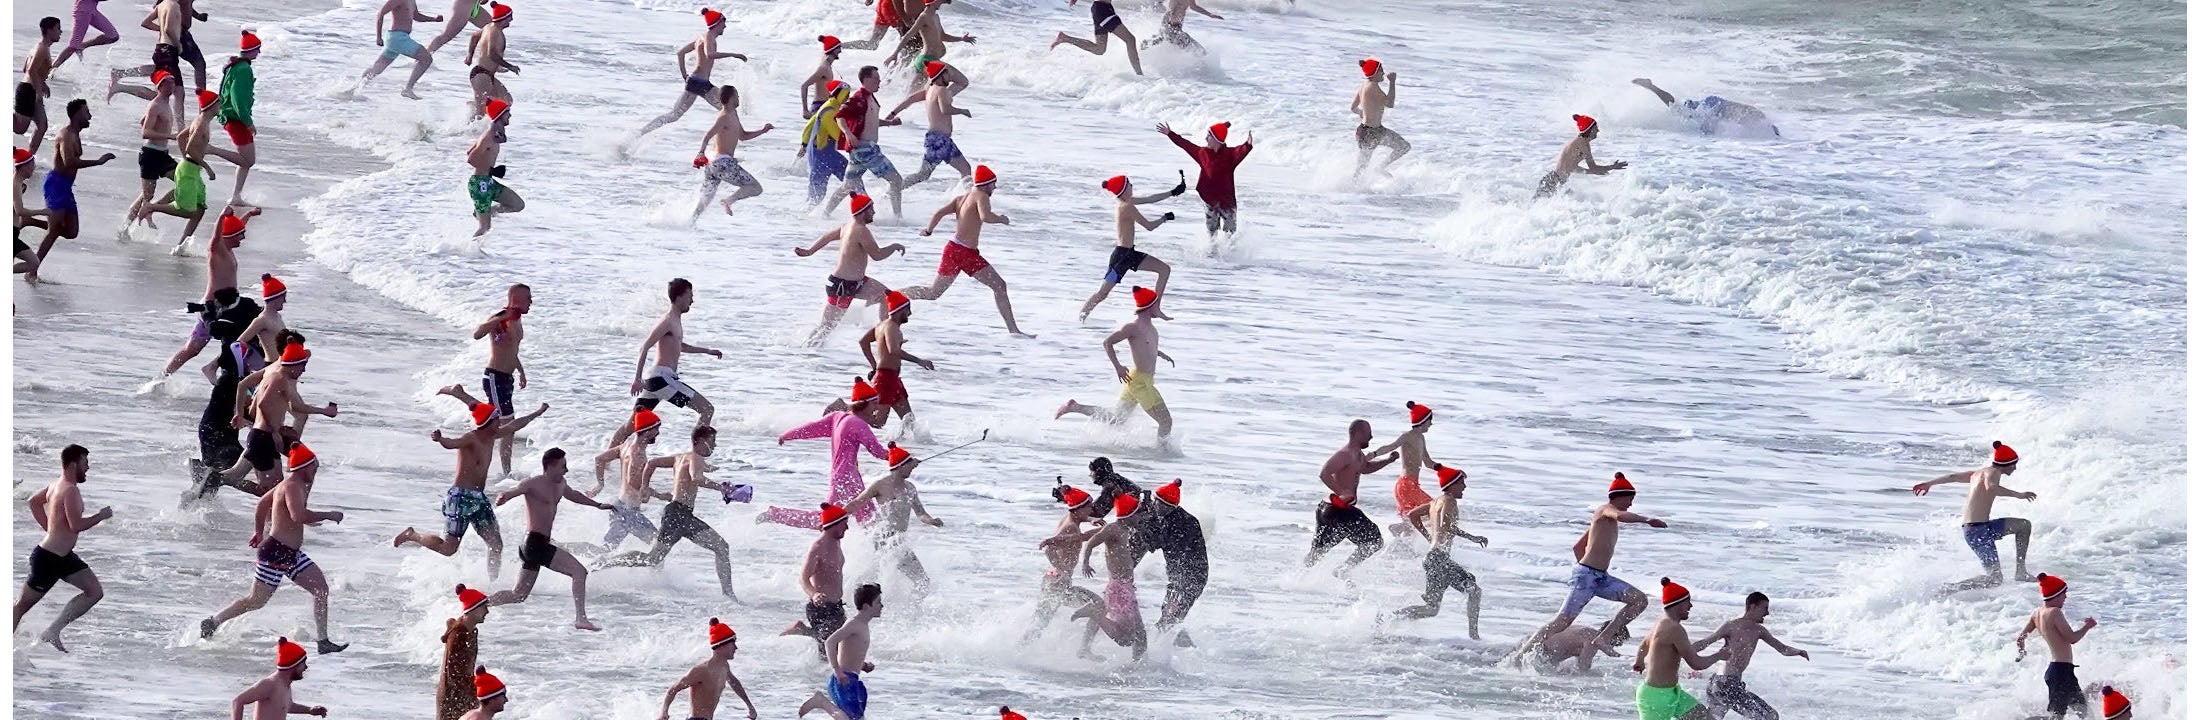 People running into the sea wearing swimwear, with caps on their heads